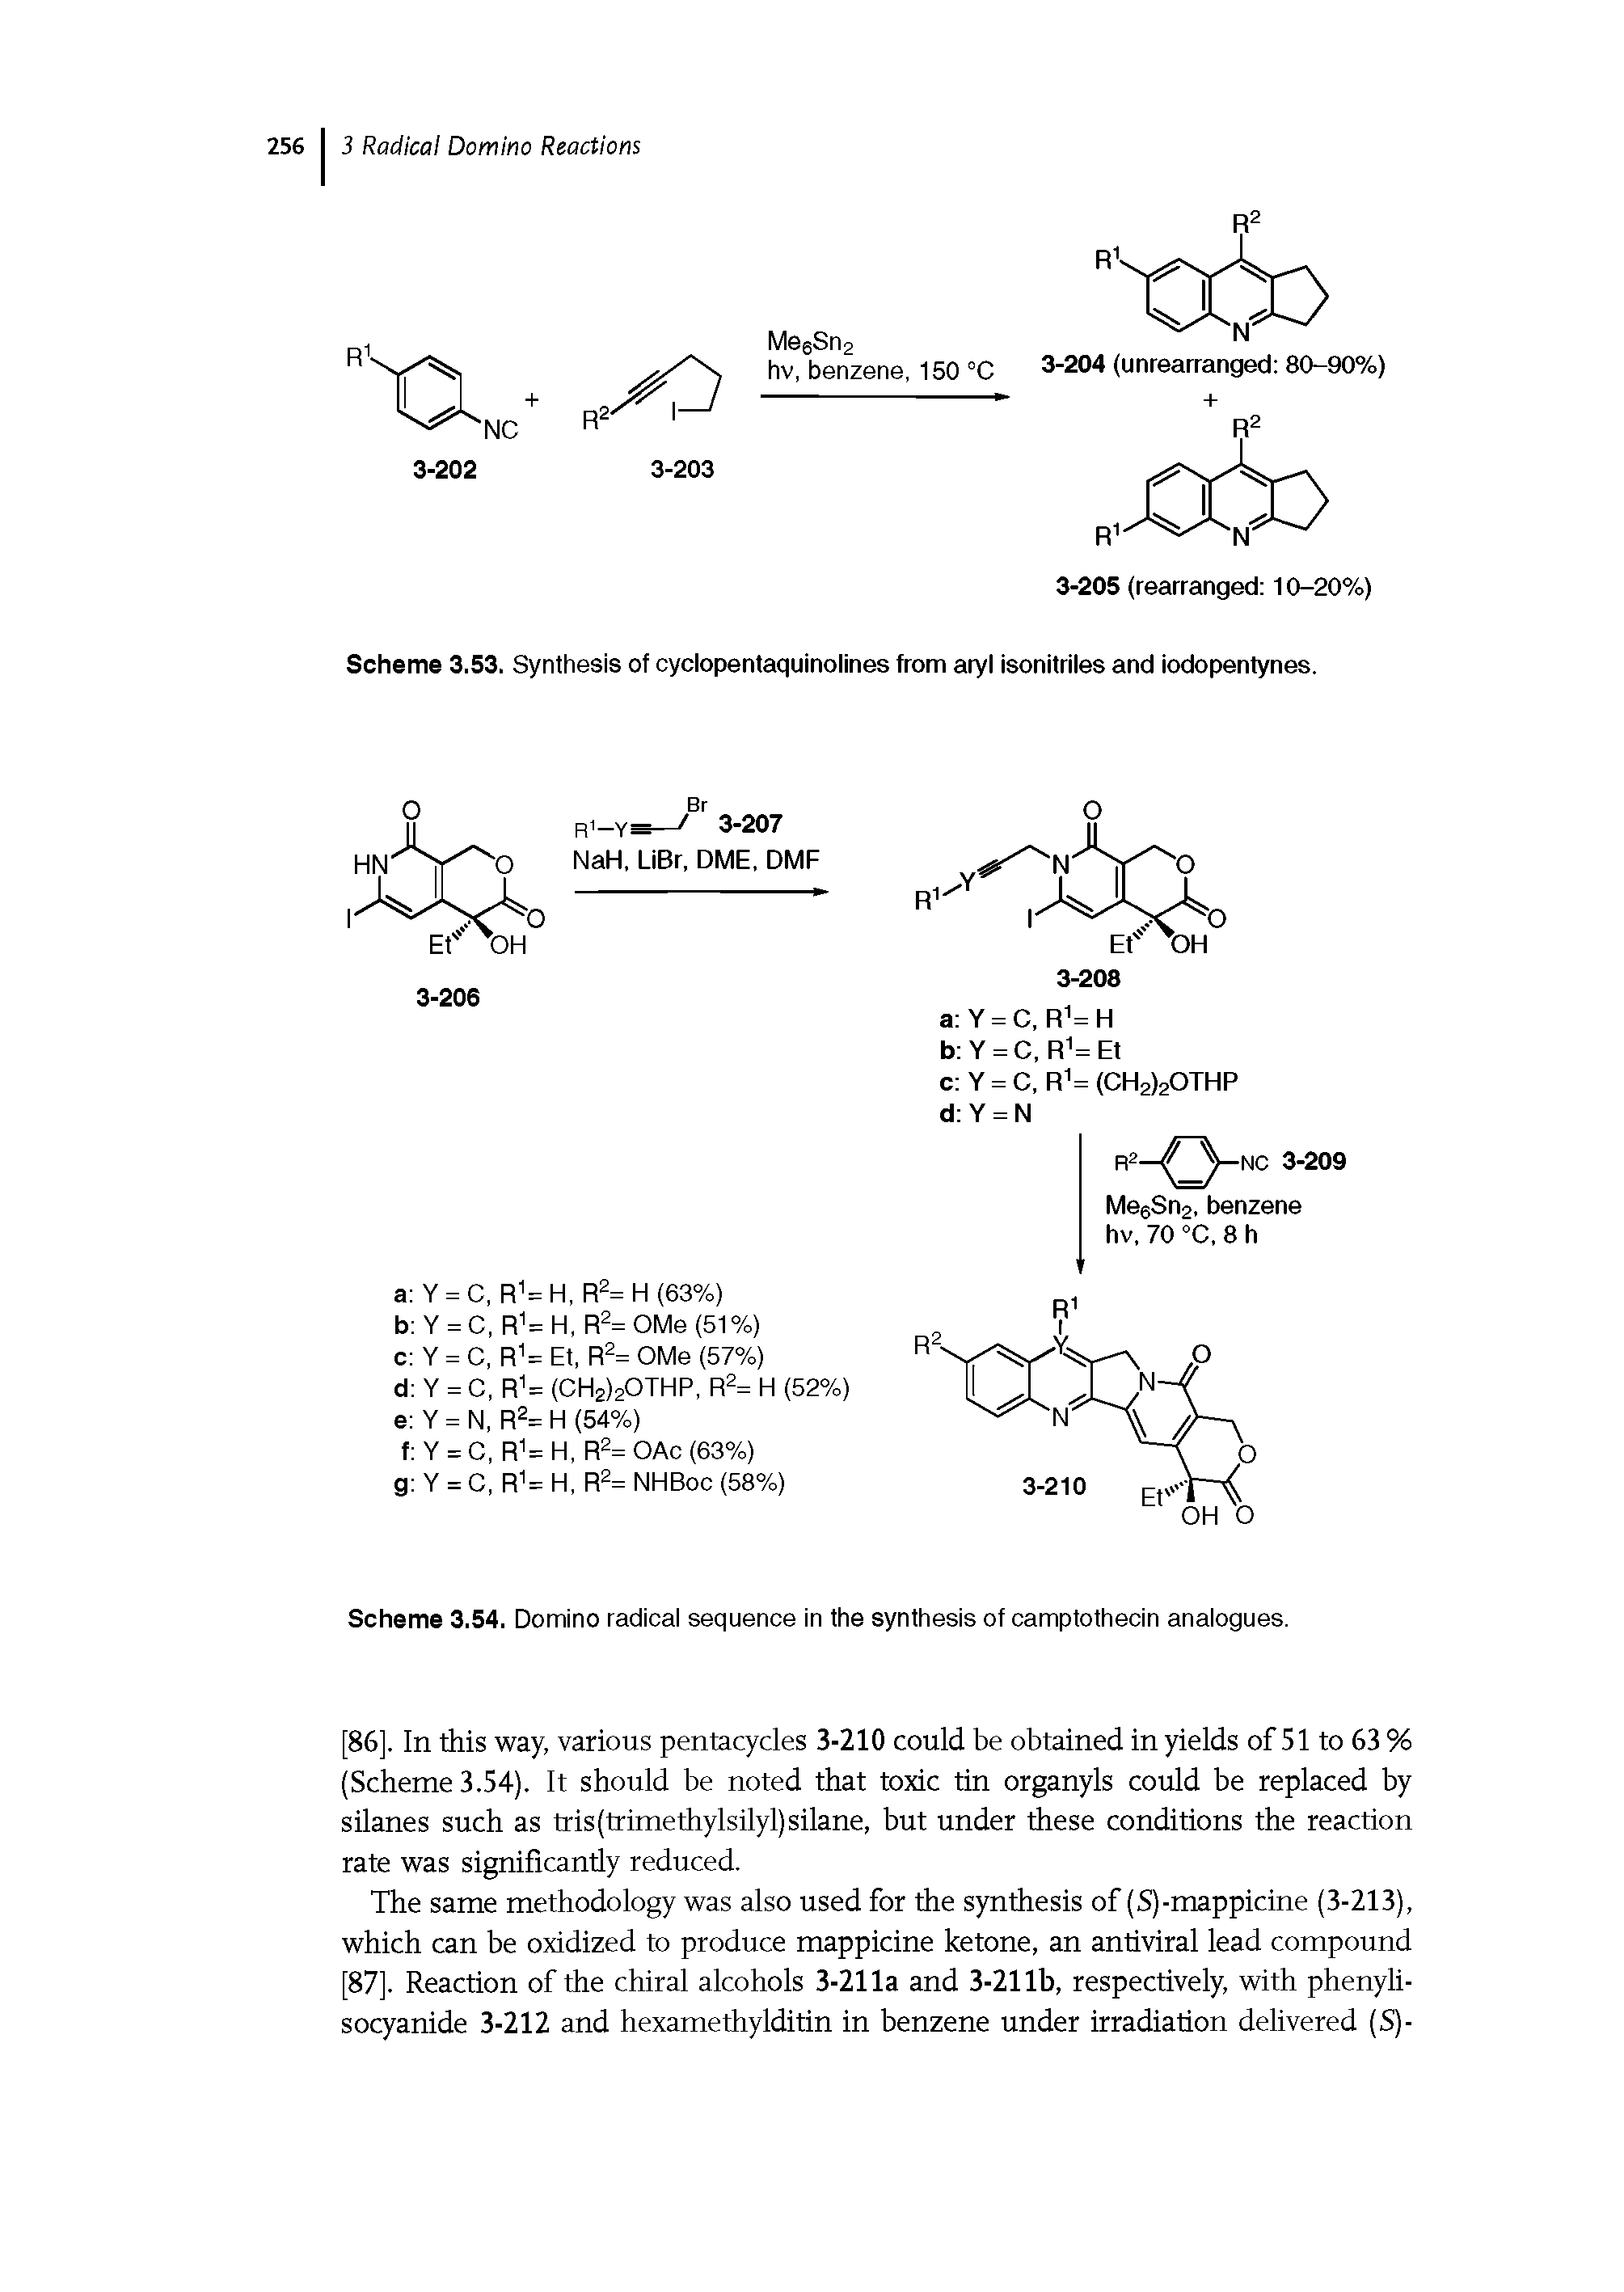 Scheme 3.53. Synthesis of cyclopentaquinolines from aryl isonitriles and iodopentynes.